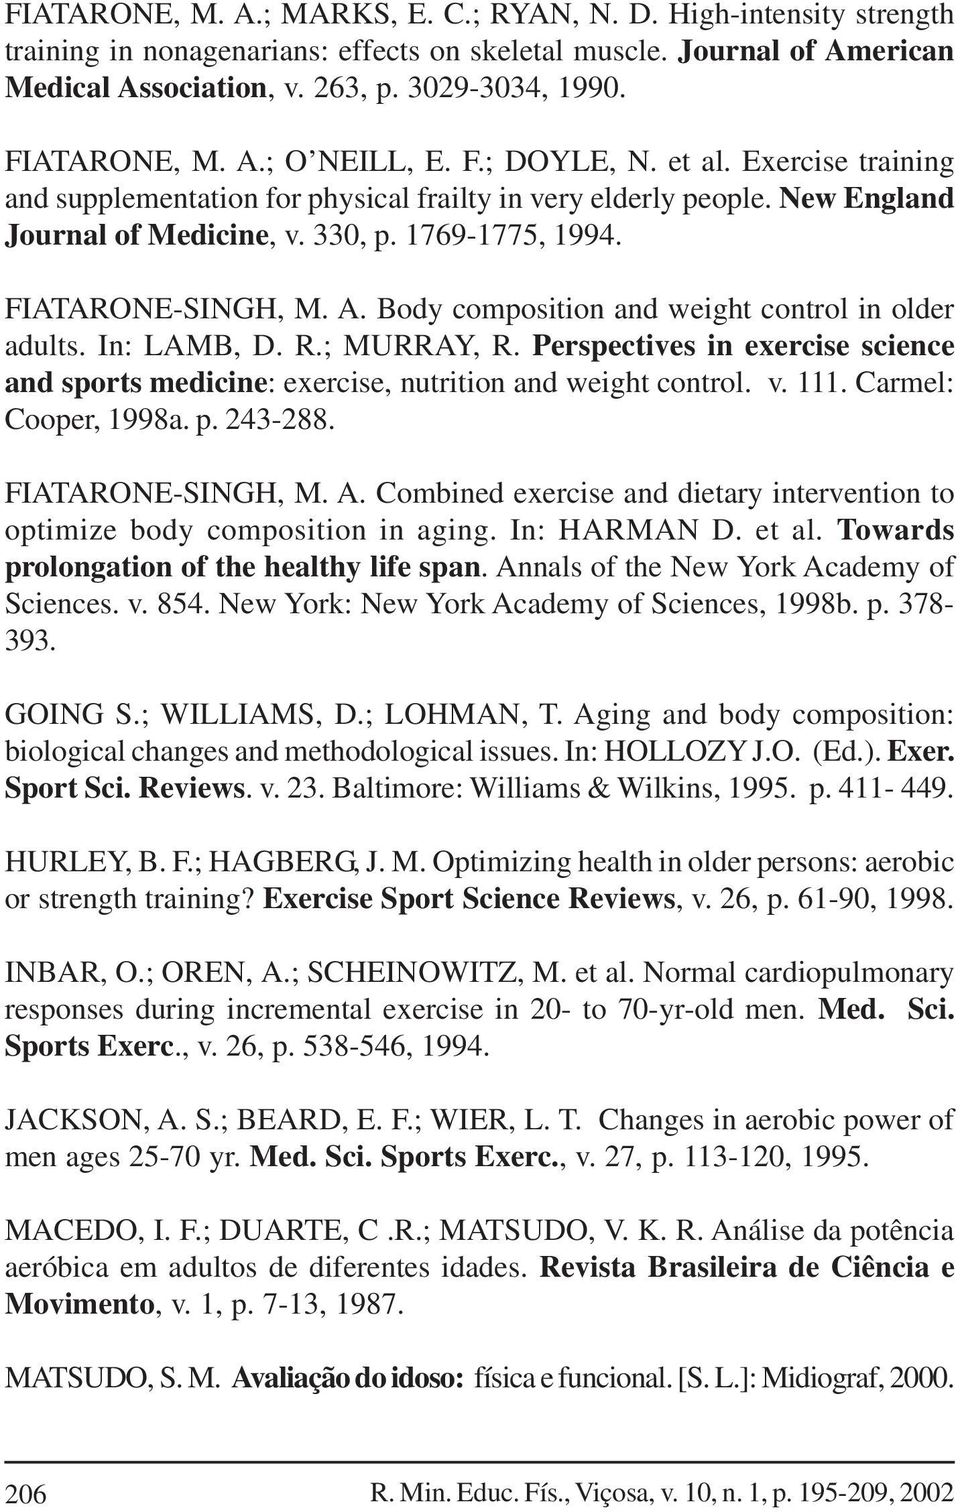 FIATARONE-SINGH, M. A. Body composition and weight control in older adults. In: LAMB, D. R.; MURRAY, R. Perspectives in exercise science and sports medicine: exercise, nutrition and weight control. v.